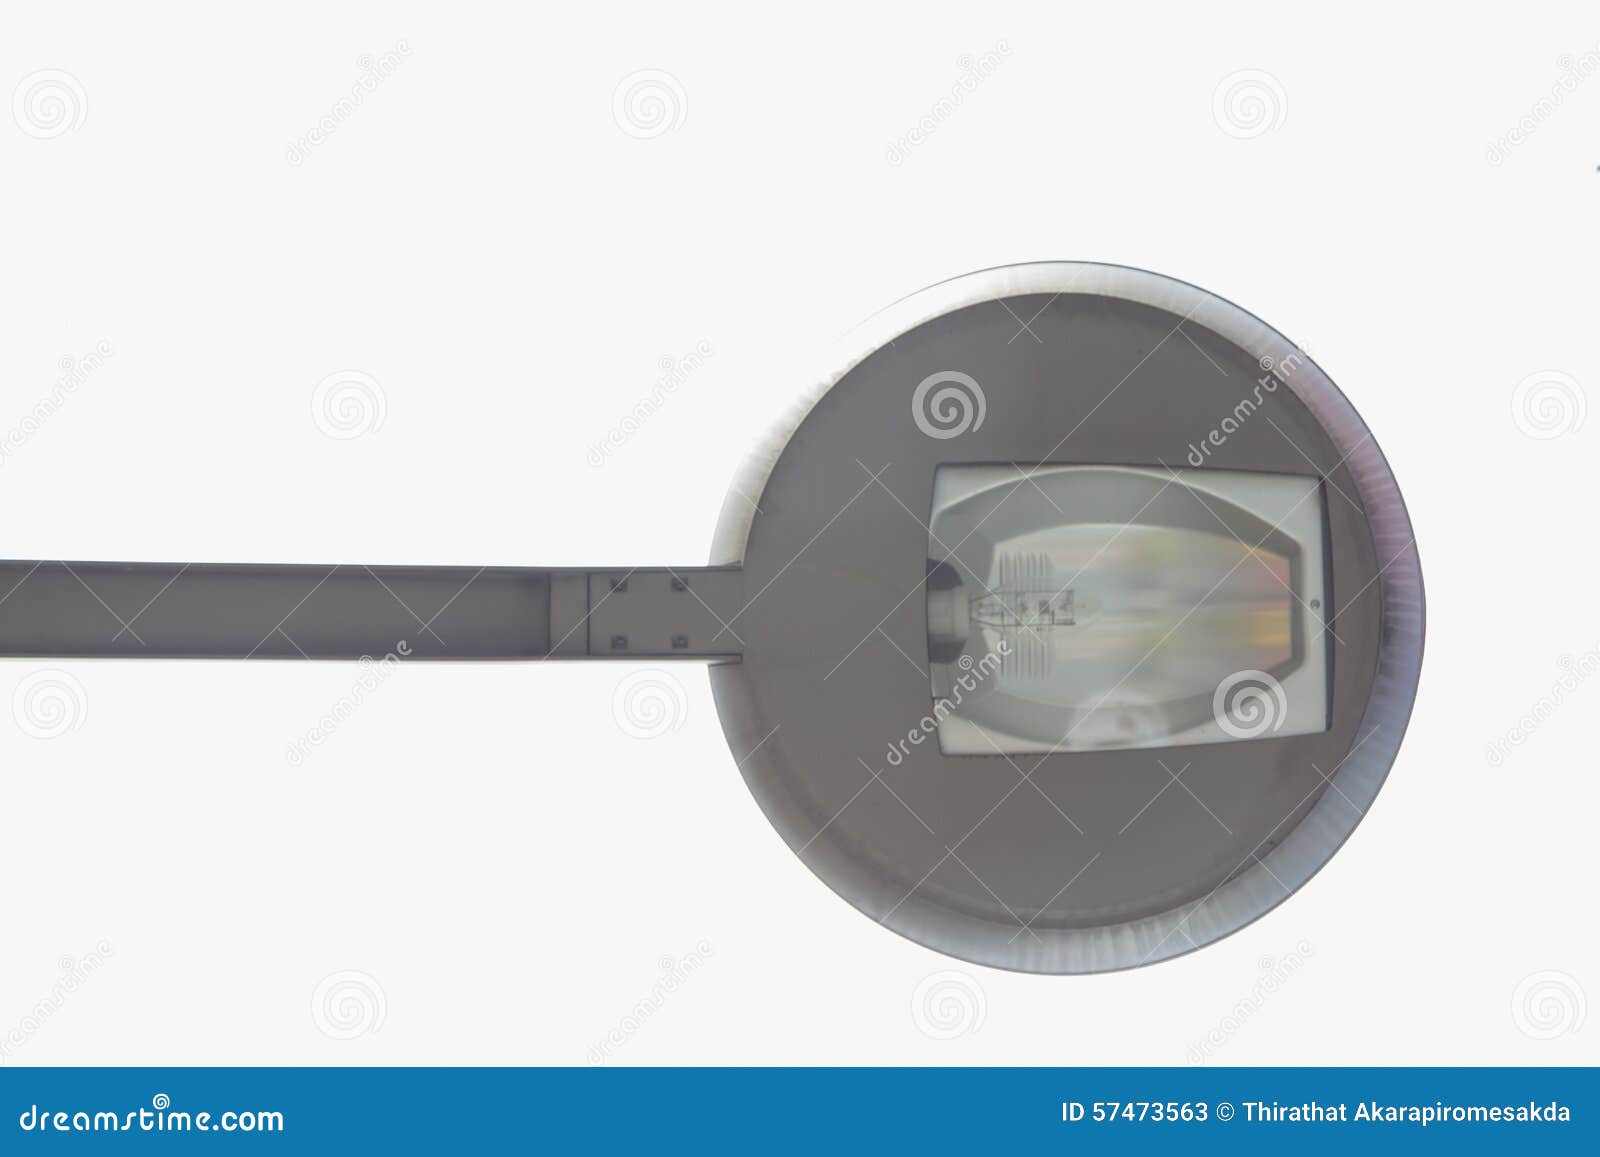 Street light stock image. Image of energy, detail, security - 57473563